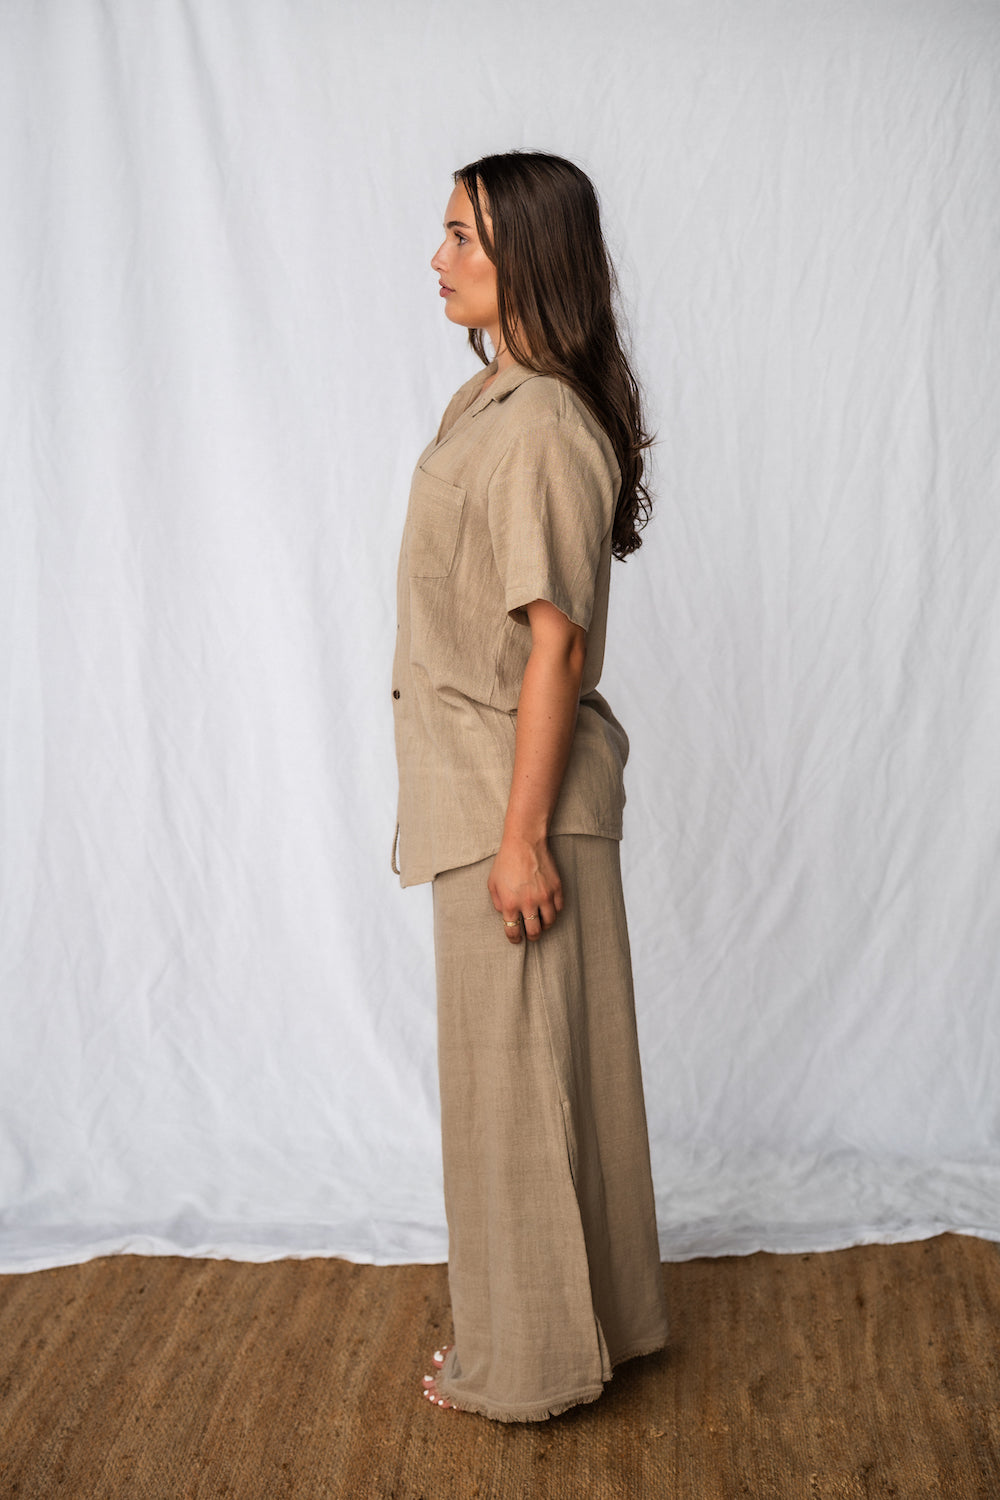 Sustainable fashion - Ramie set made from plants